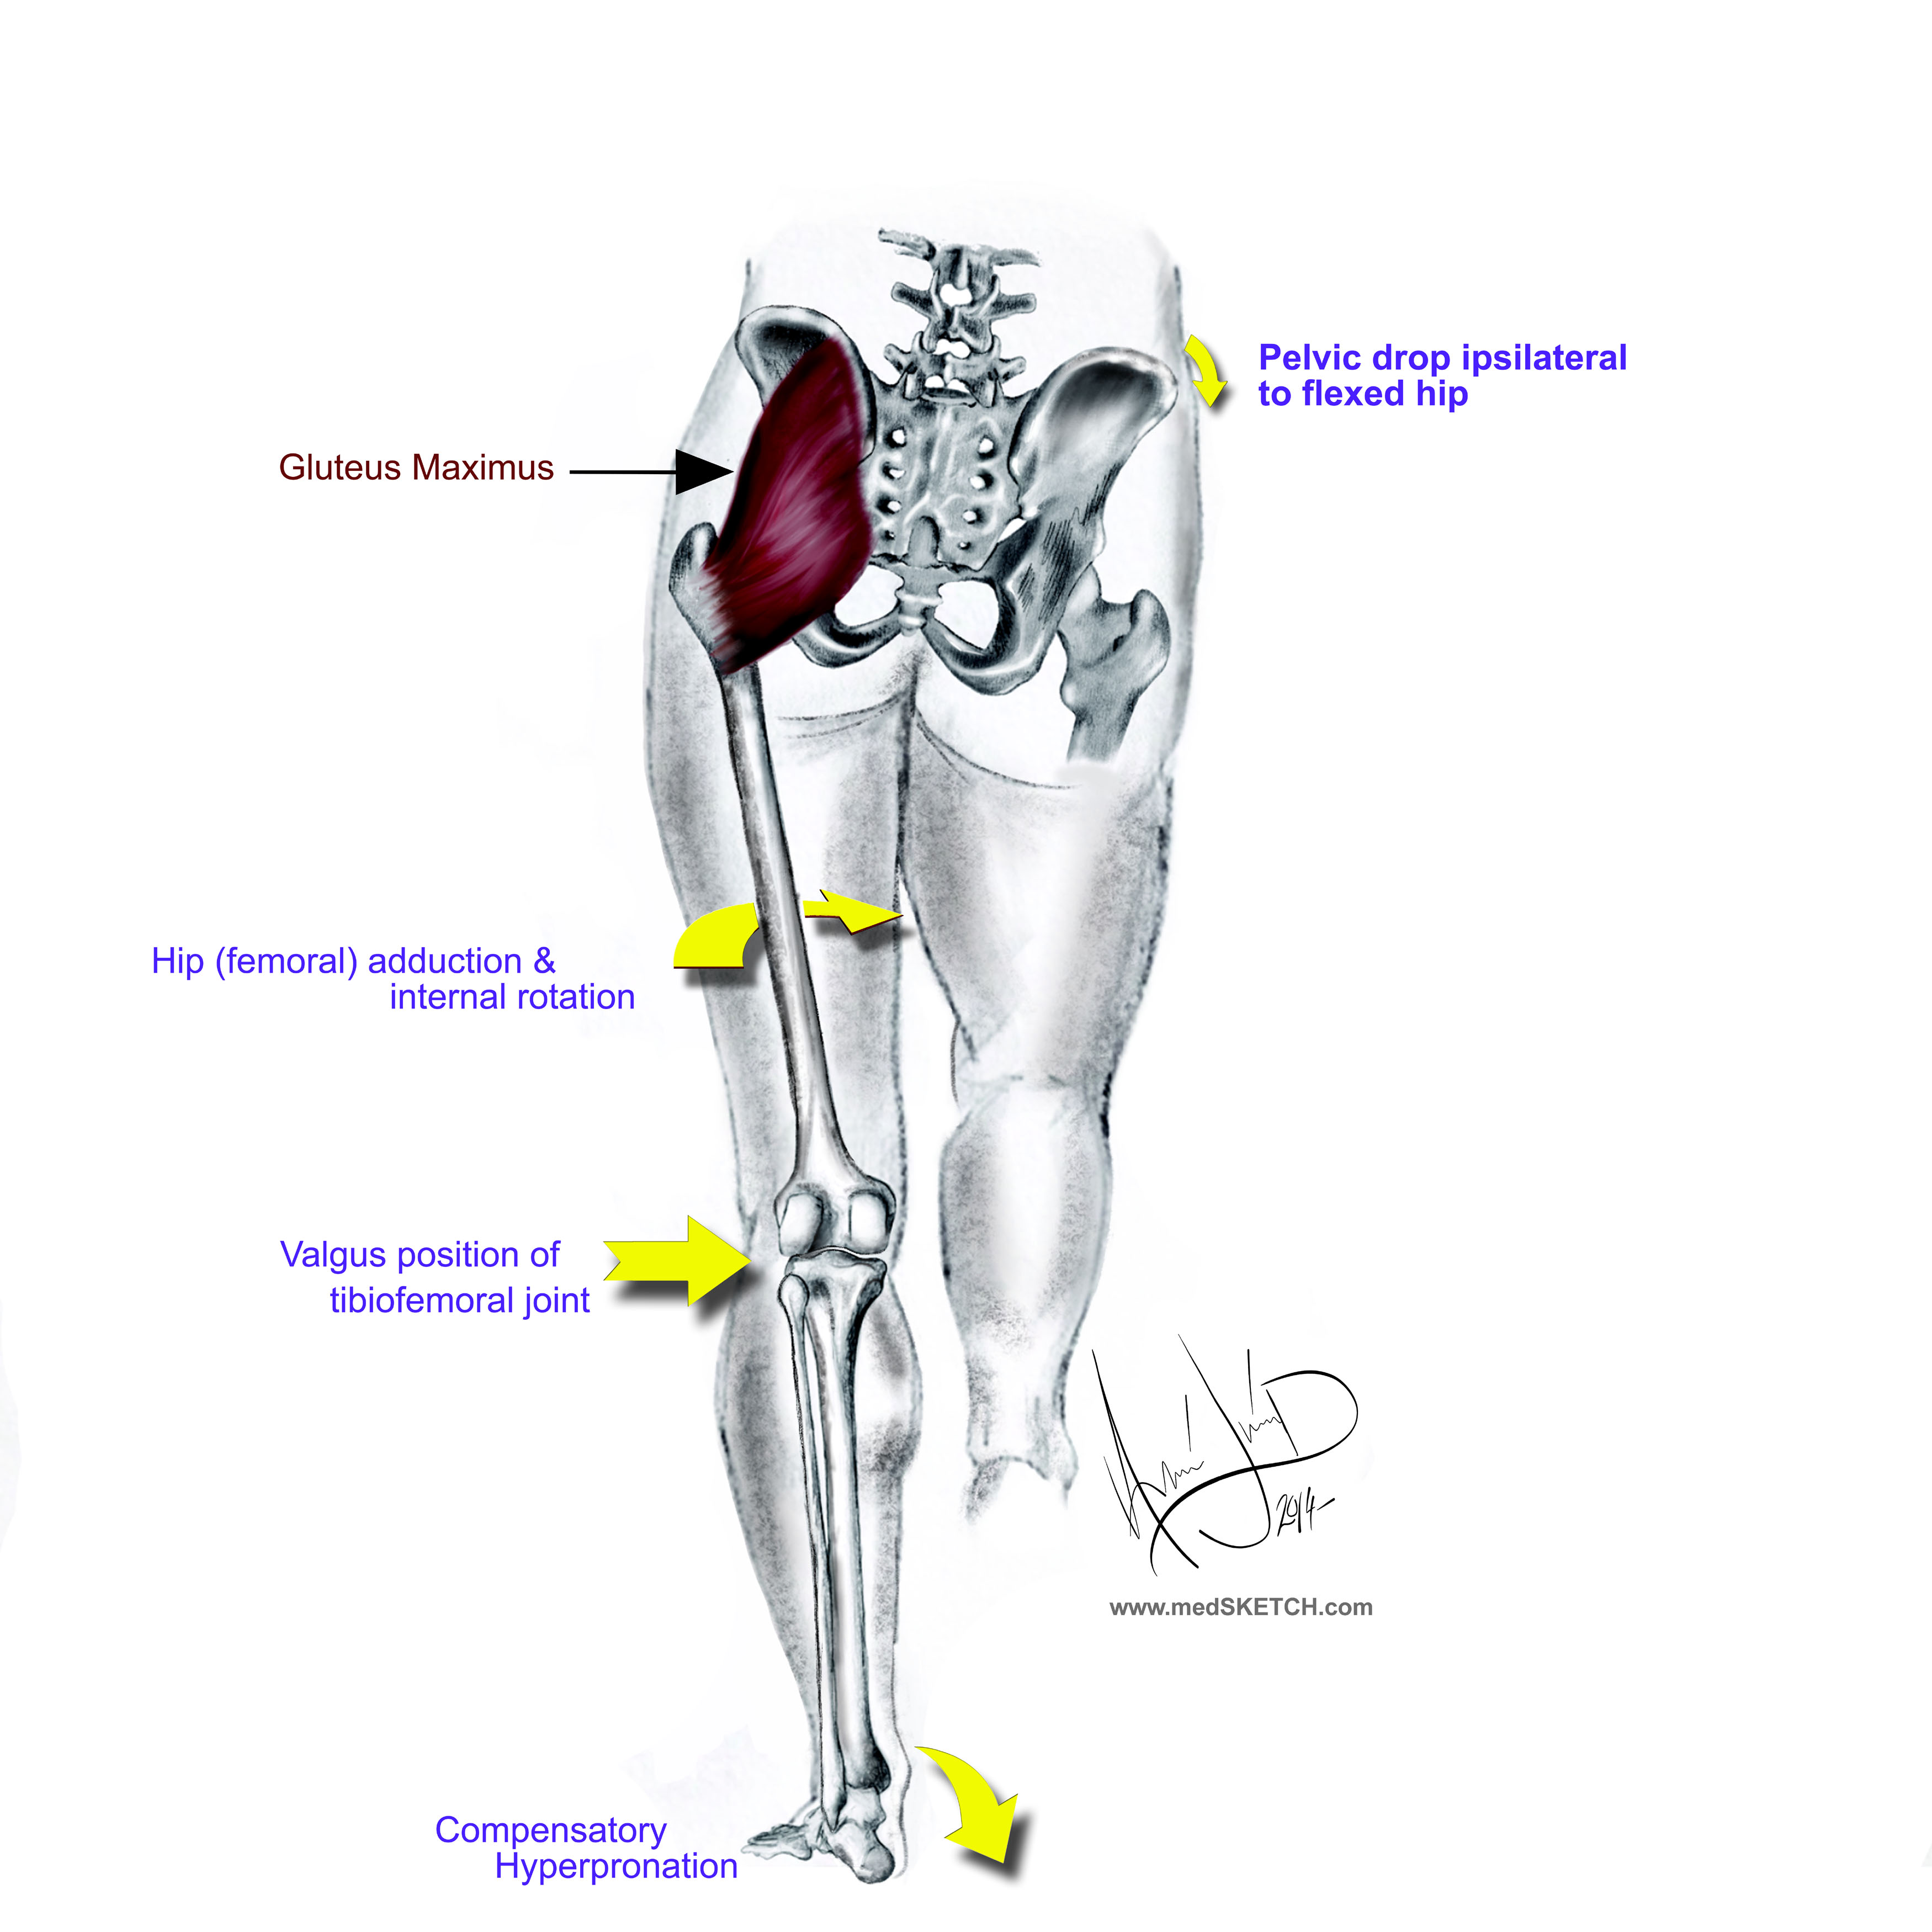 Figure 2.  Gluteus maximus weakness creates a cascade of events that increases the likelihood of injury.  GM weakness causes a contralateral pelvic lowering, ipsilateral internal rotation of the femur which results in a valgus position of the knee and compensatory hyperpronation. 